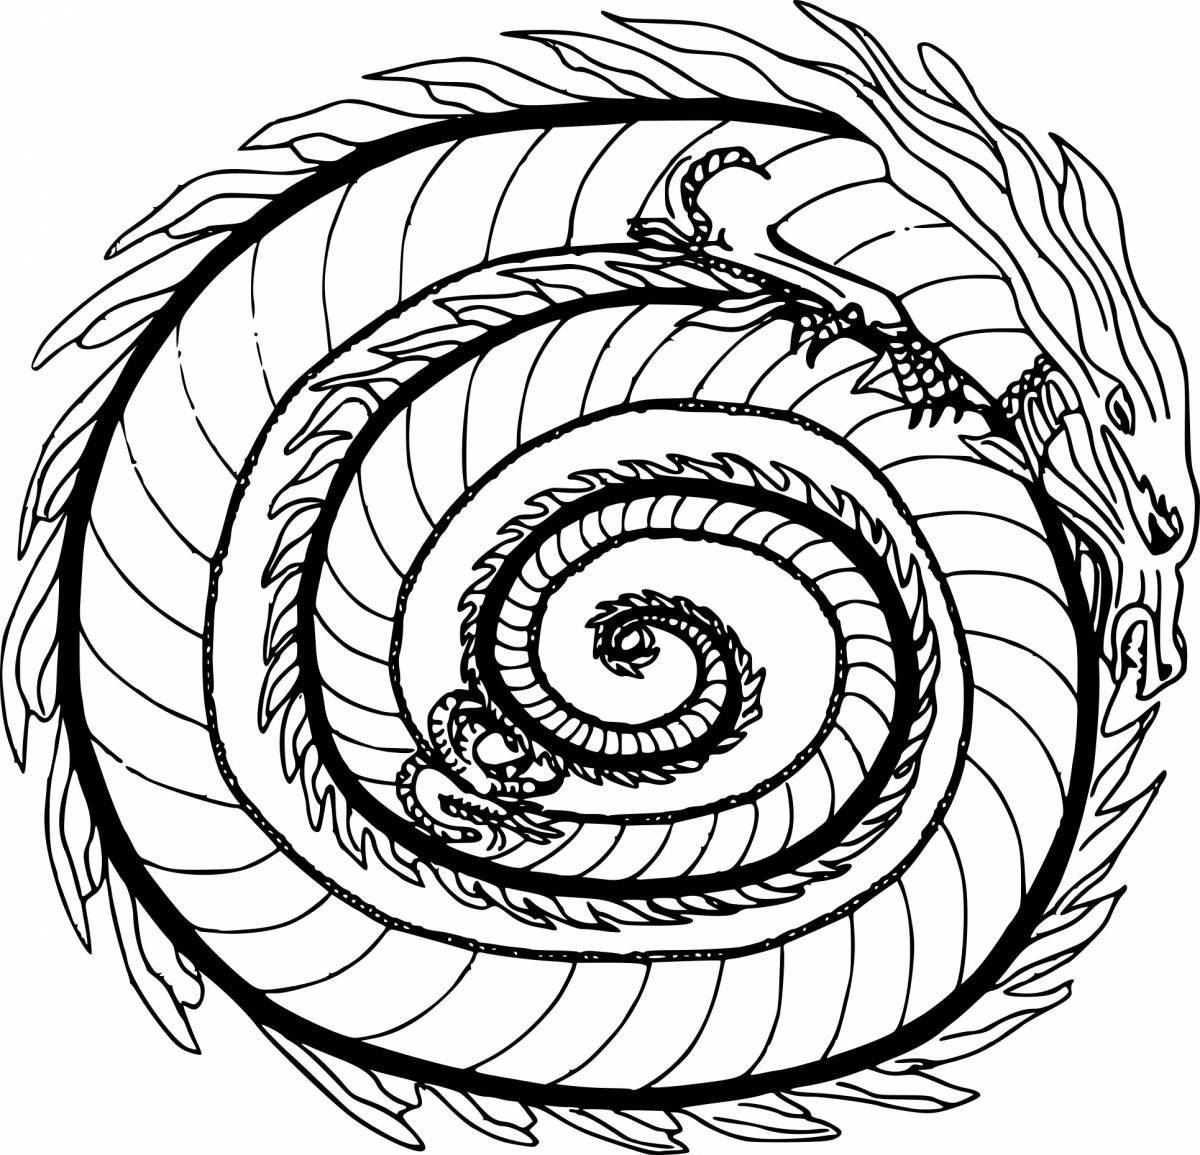 Coloring book soothing anti-stress spirals